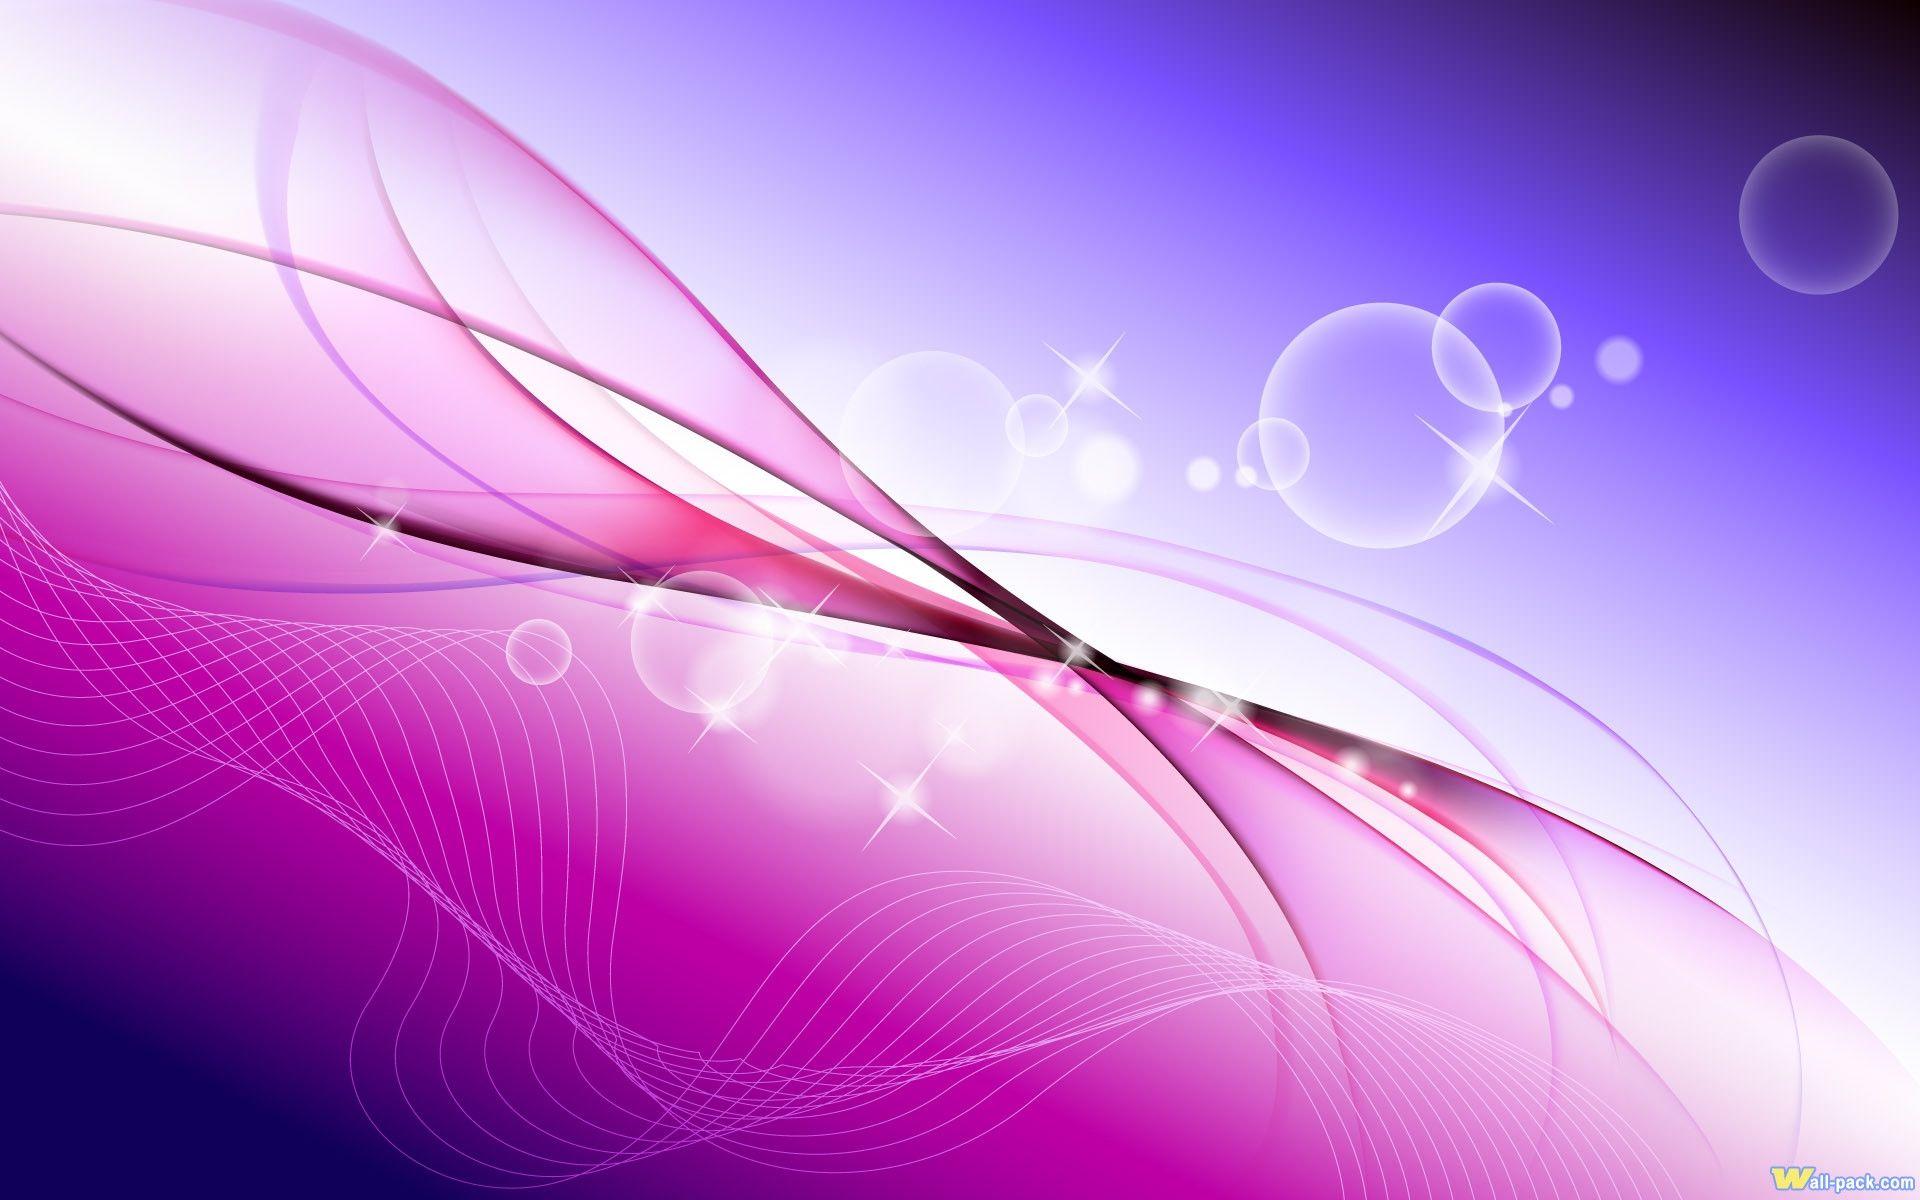 Abstract Purple Background Image Wallpaper. lookwallpaper